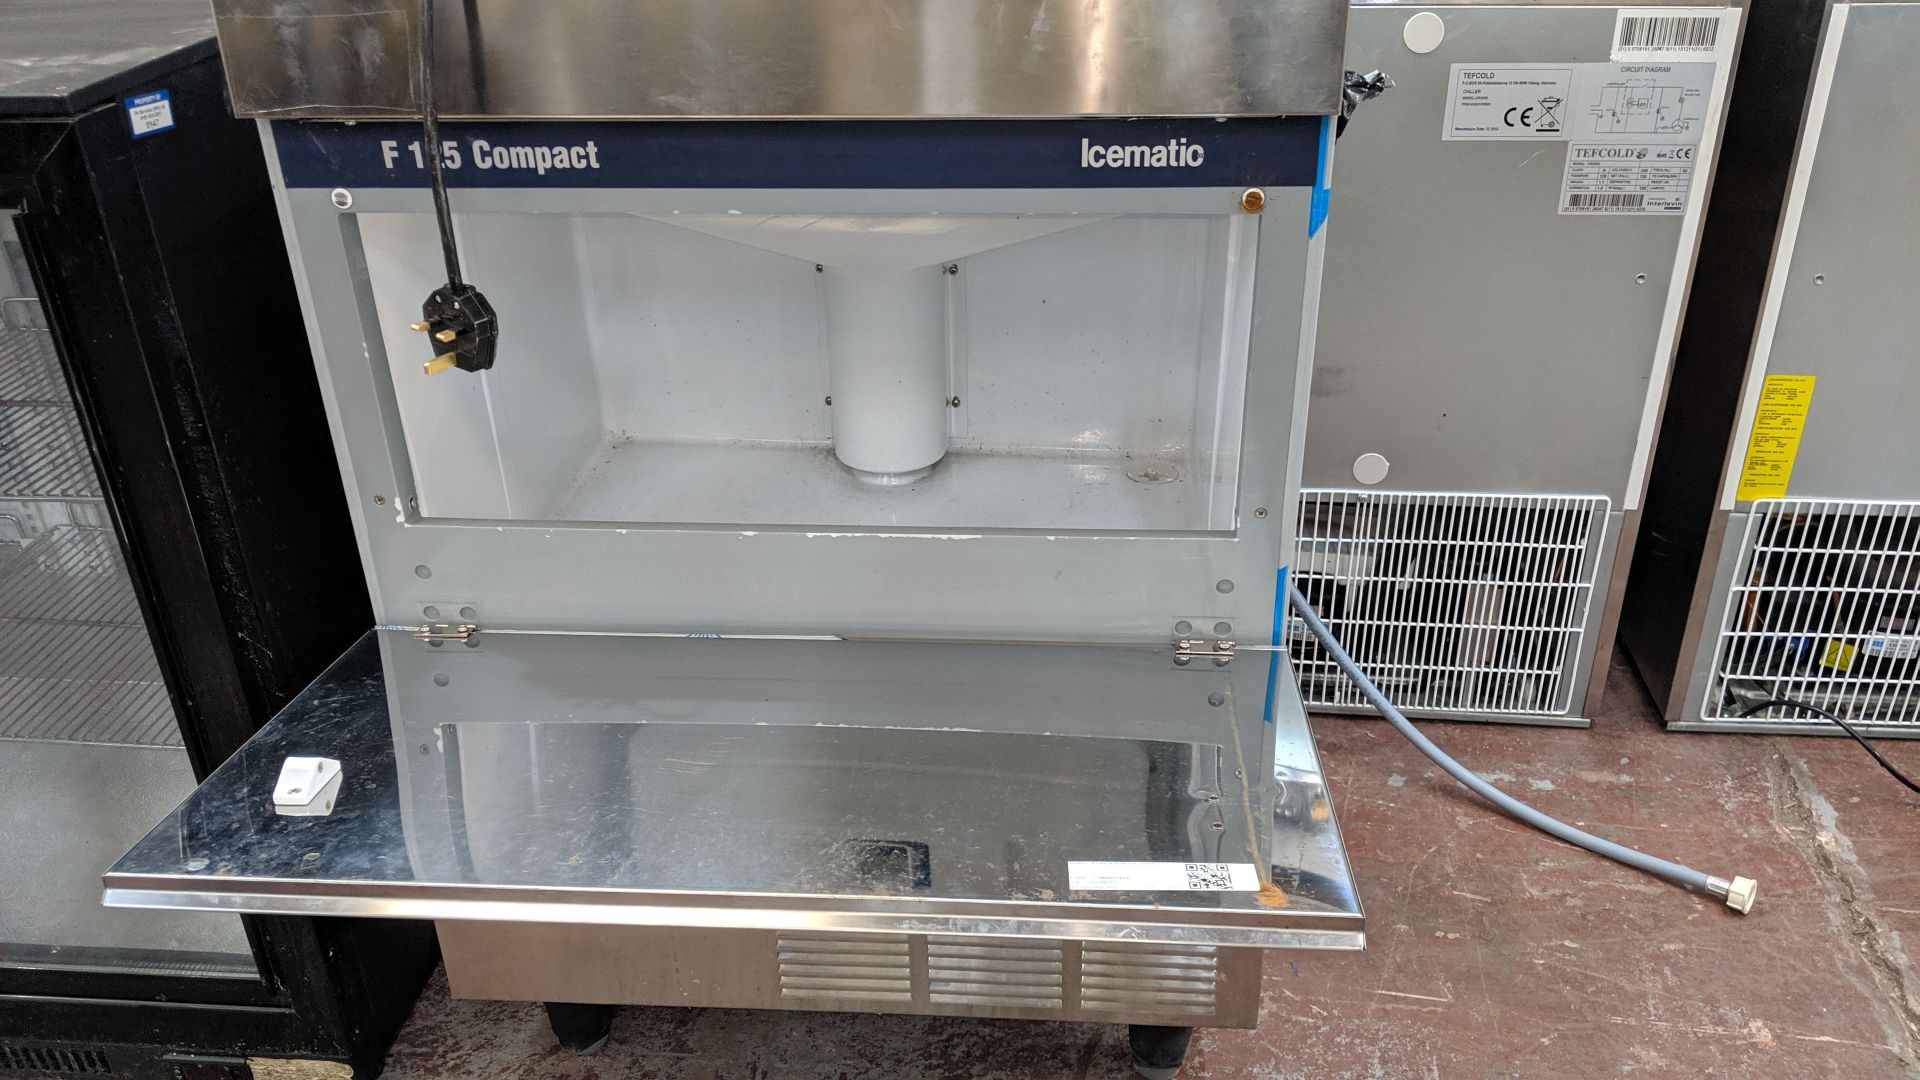 Icematic F125 compact ice machine IMPORTANT: Please remember goods successfully bid upon must be - Image 5 of 6